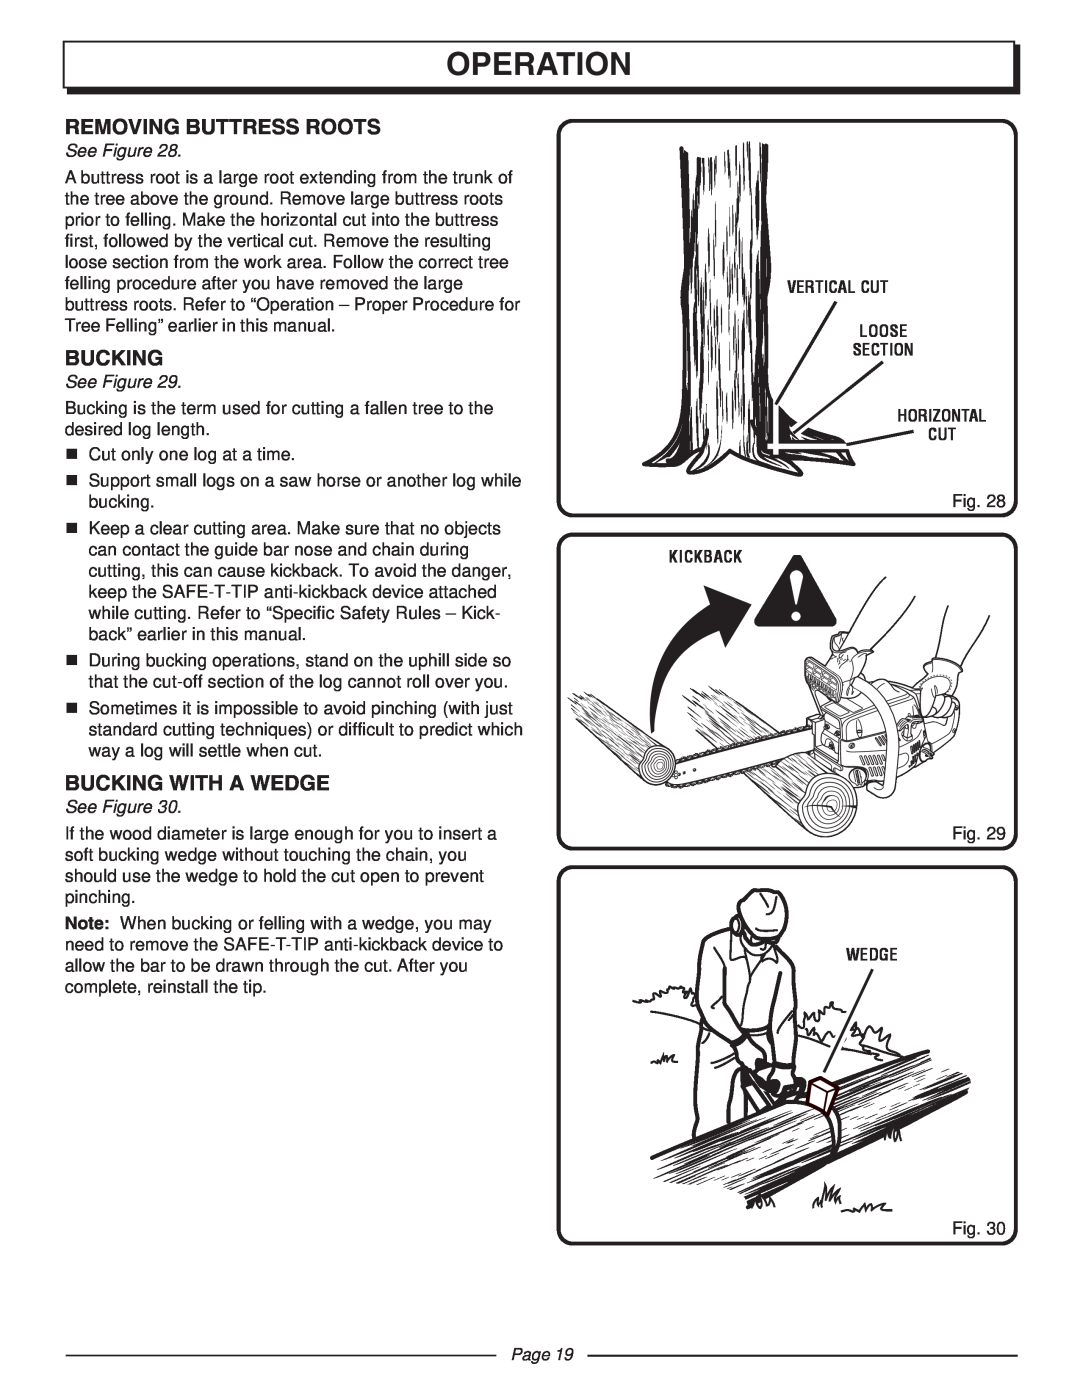 Homelite UT10510A manual Removing Buttress Roots, Bucking With A Wedge, Operation, See Figure, Page 